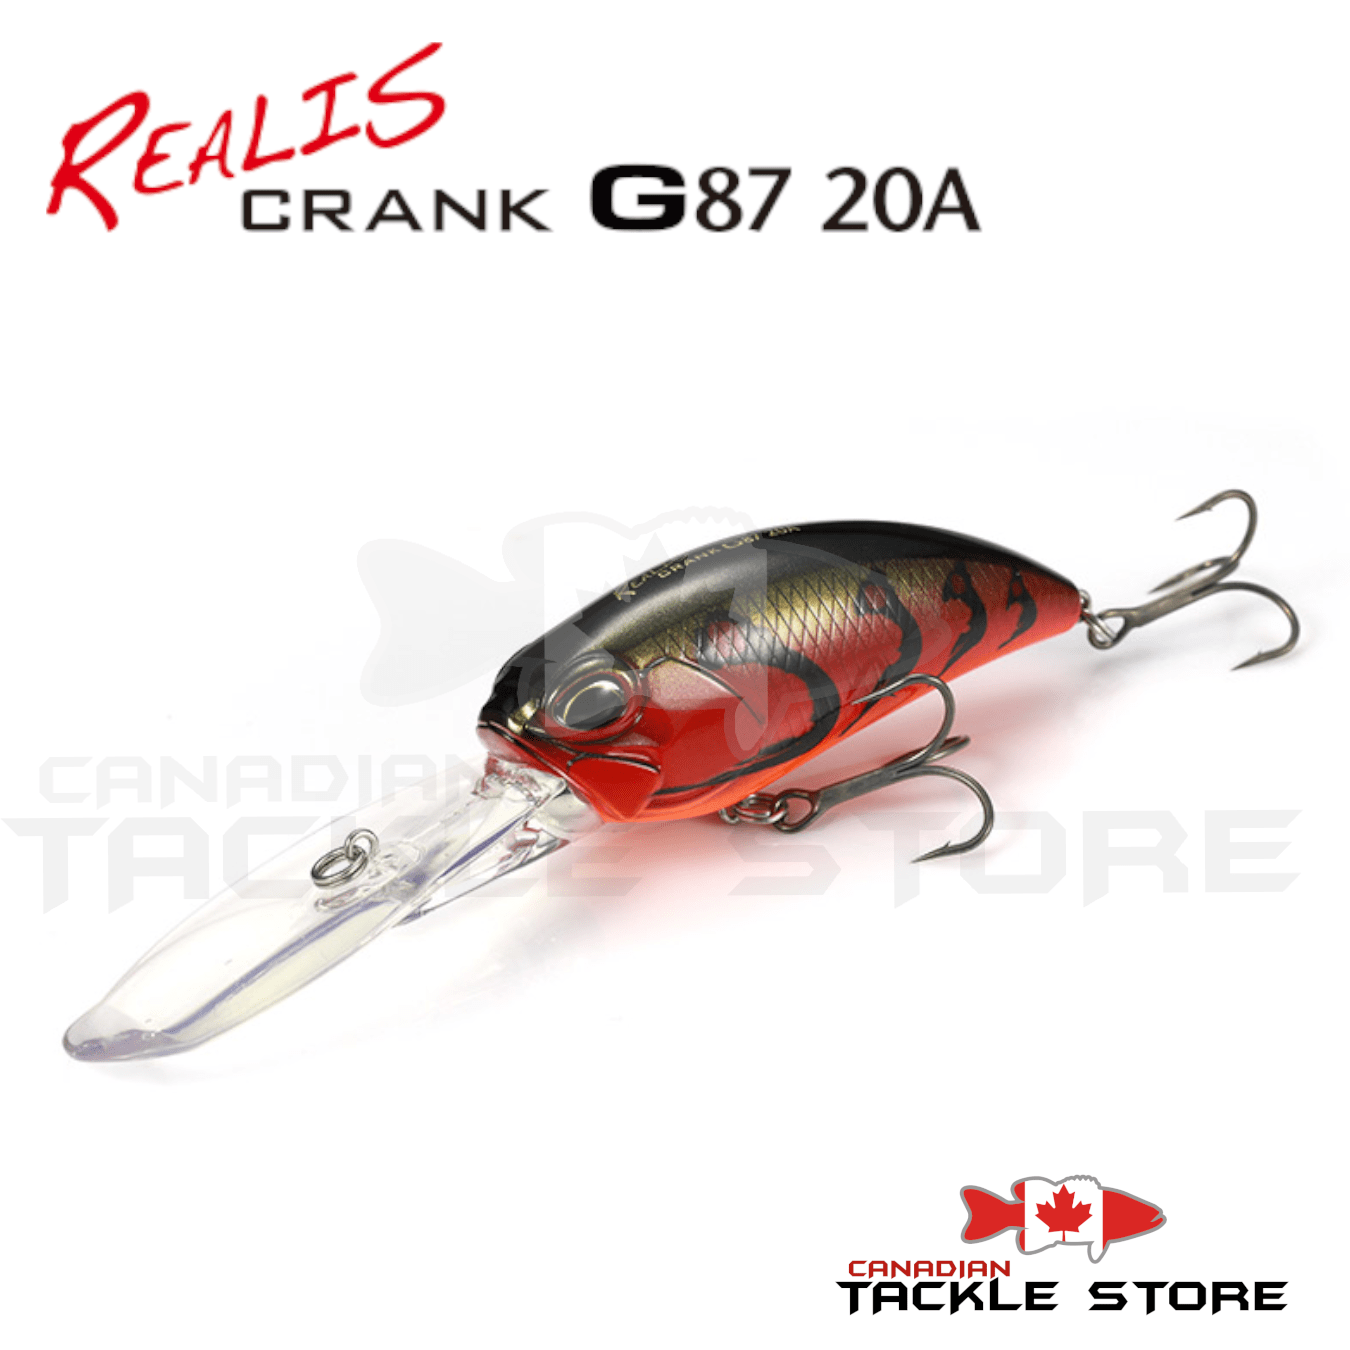 Duo Realis Lures Crank G87 15A Aaron Tiger Jagged Tooth Tackle